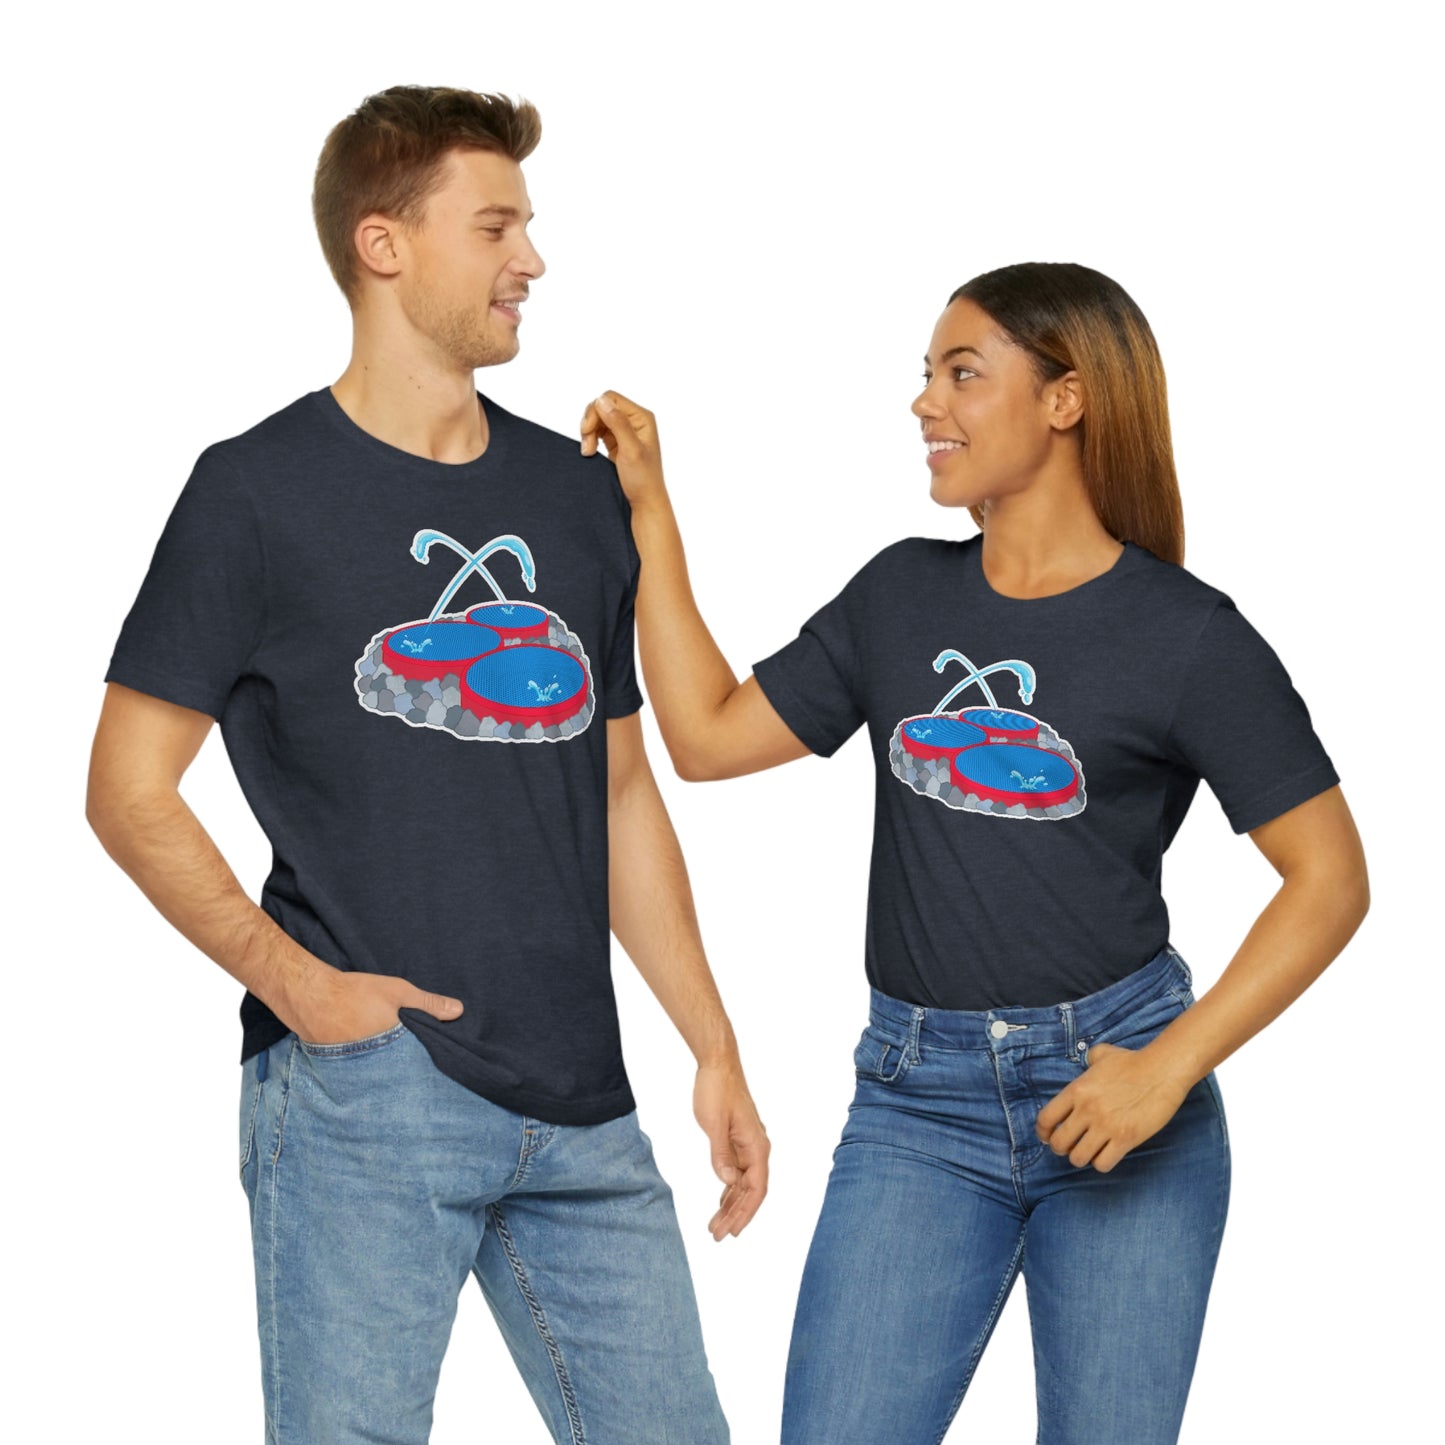 Jumping Fountains Tee